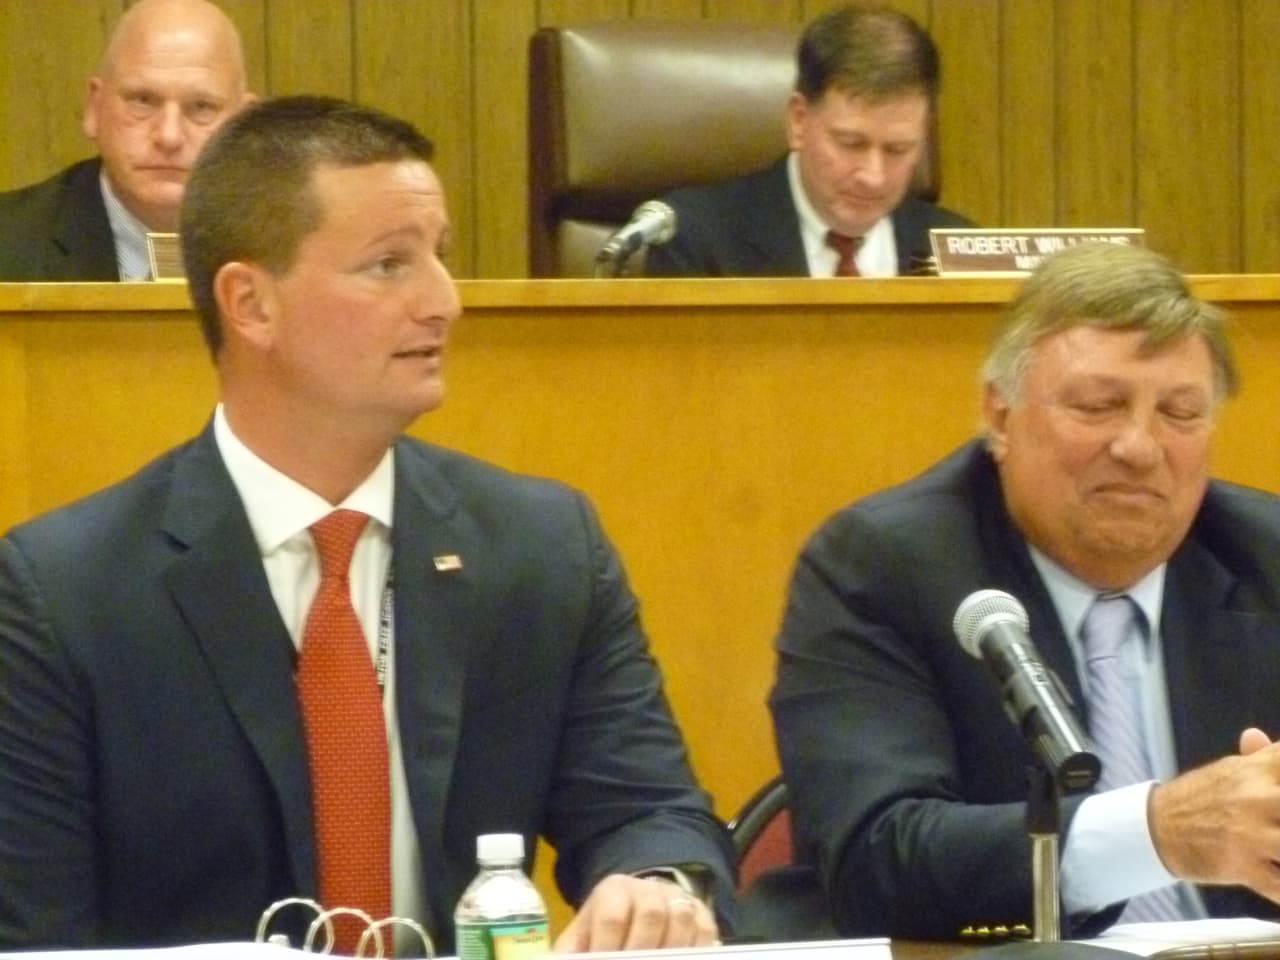 Elmsford's School Superintendent Dr. Joseph Ricca, left, seated with Board of Education President Michael Colasuonno last month, annouced the Board would opt out of "Race To The Top".

